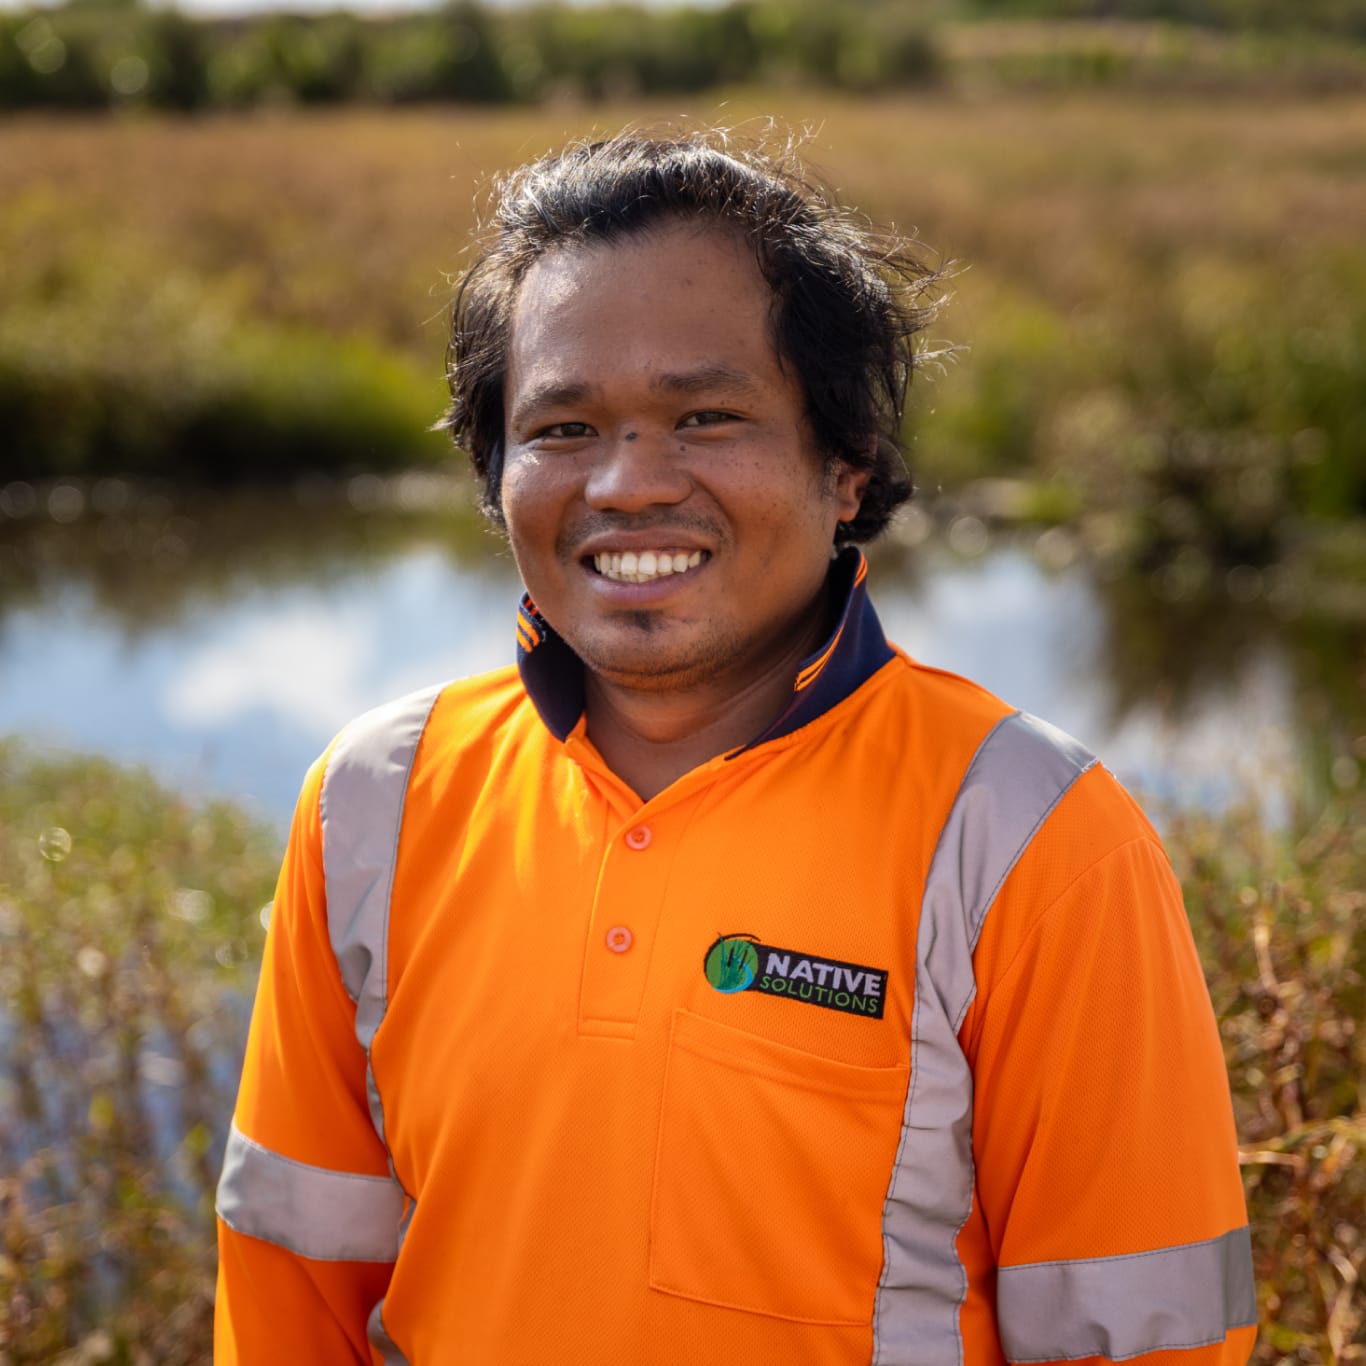 Team member of Native Solutions providing erosion control, planting, and vegetation management, servicing Marlborough, Canterbury, Christchurch, Kaikoura, and nationwide